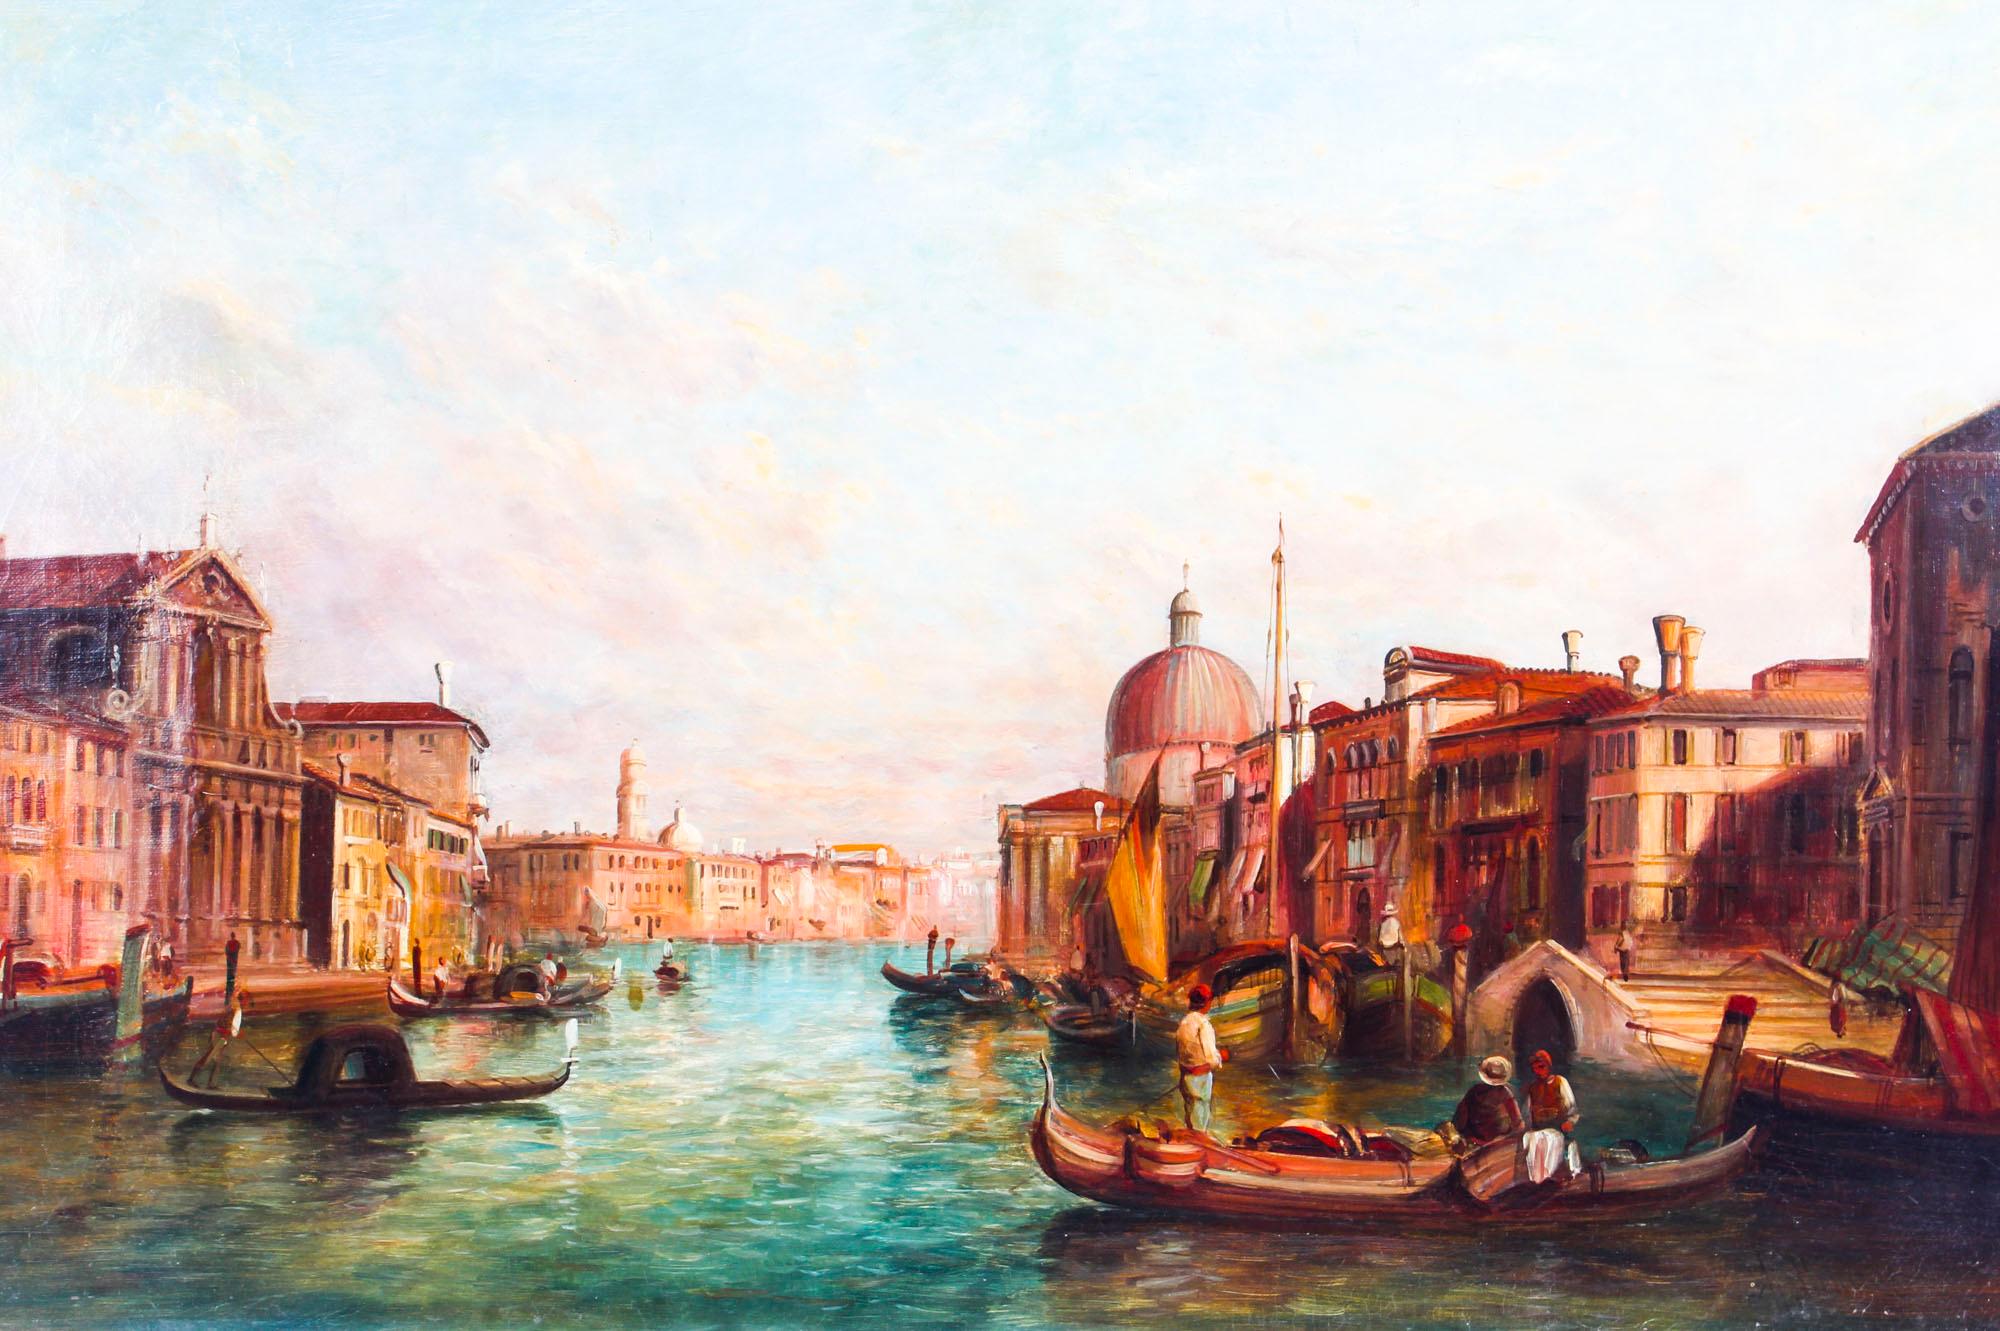 This is a beautiful oil on canvas painting of the view of the Doge's Palace and the entrance to the Piazza San MarCo Canal in Venice by the renowned British artist Alfred Pollentine (1836-1890) and signed lower right.

This beautiful landscape